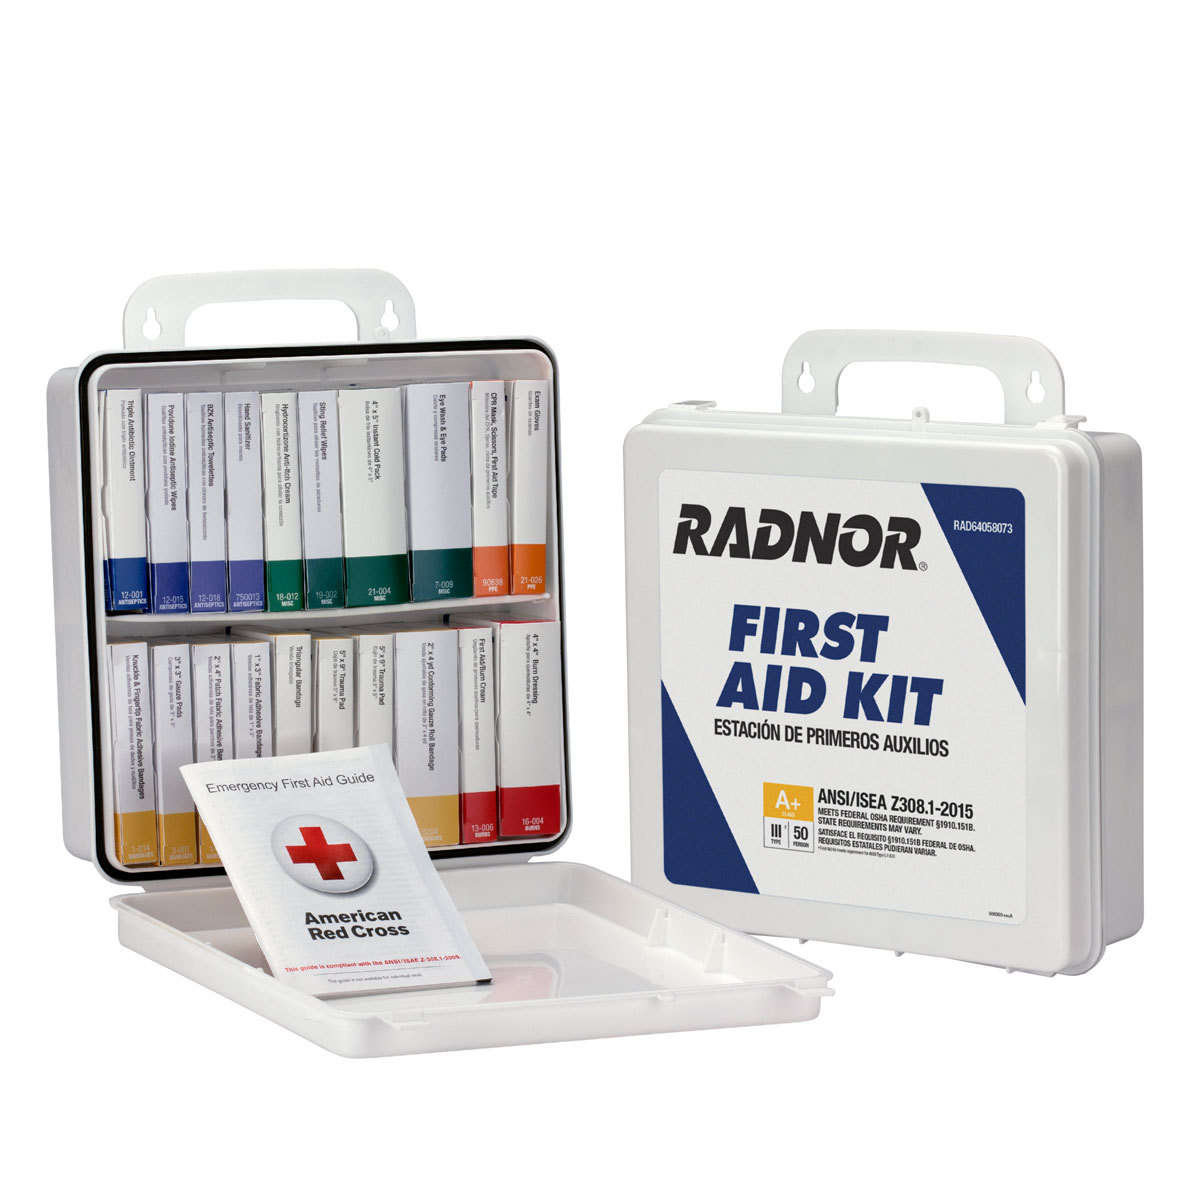 RADNOR® White Plastic Portable Or Wall Mounted 50 Person 24 Unit First Aid Kit